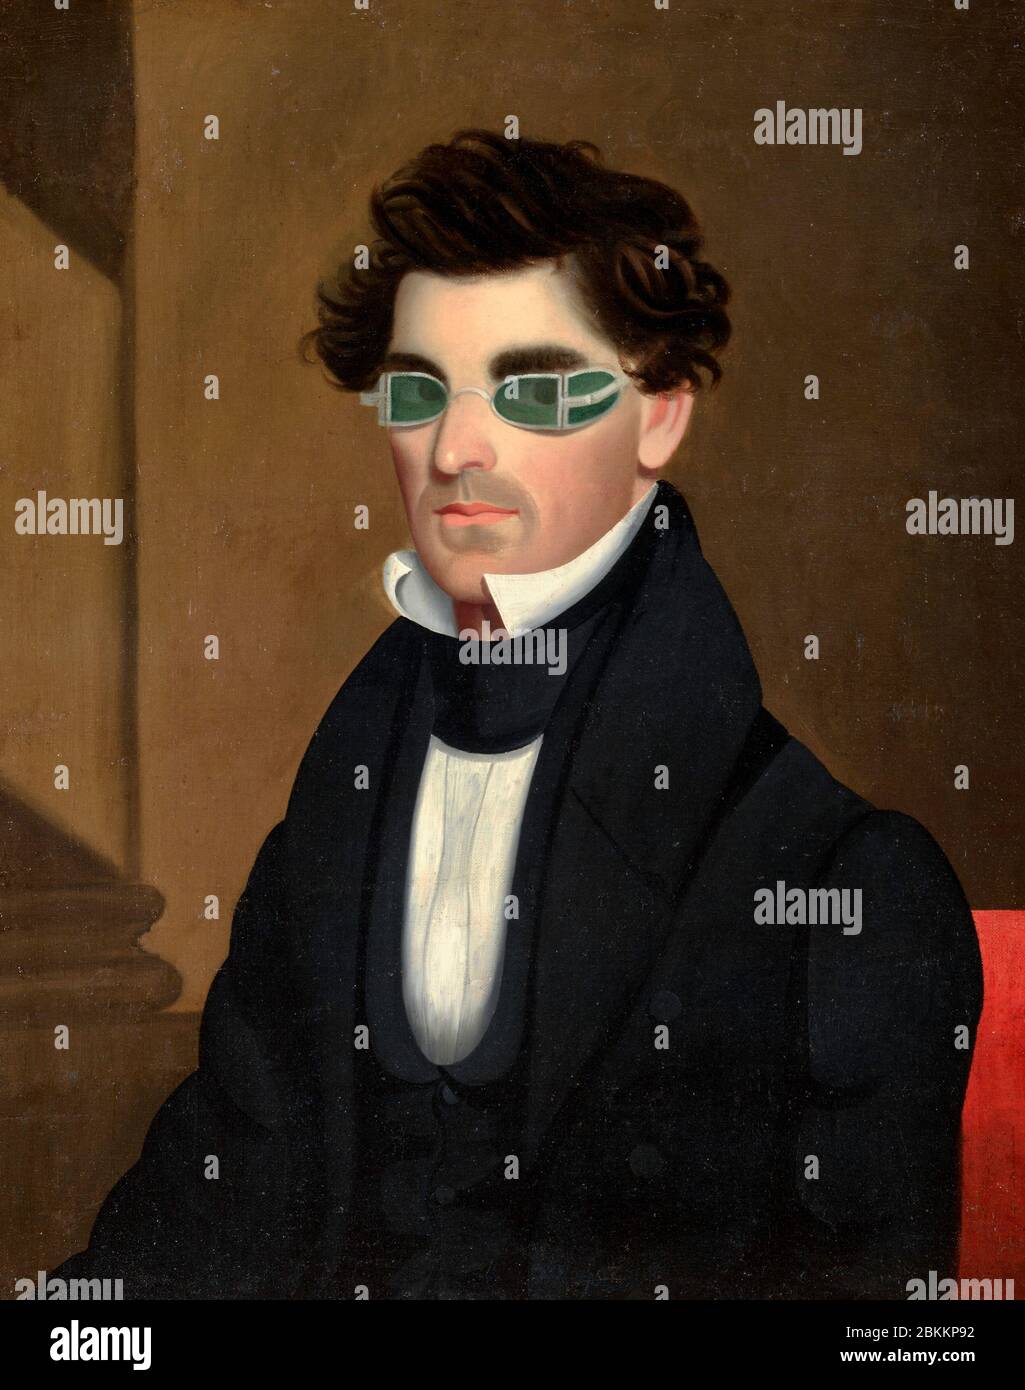 Nathaniel Olds by Jeptha Homer Wade, 1839.  The green-tinted spectacles worn by Olds were designed to protect the eyes from the intensity of Argand lamps, a type of indoor light used during the early 1800s. These lamps burned whale oil, and many people worried that its bright flames might damage eyesight. Stock Photo